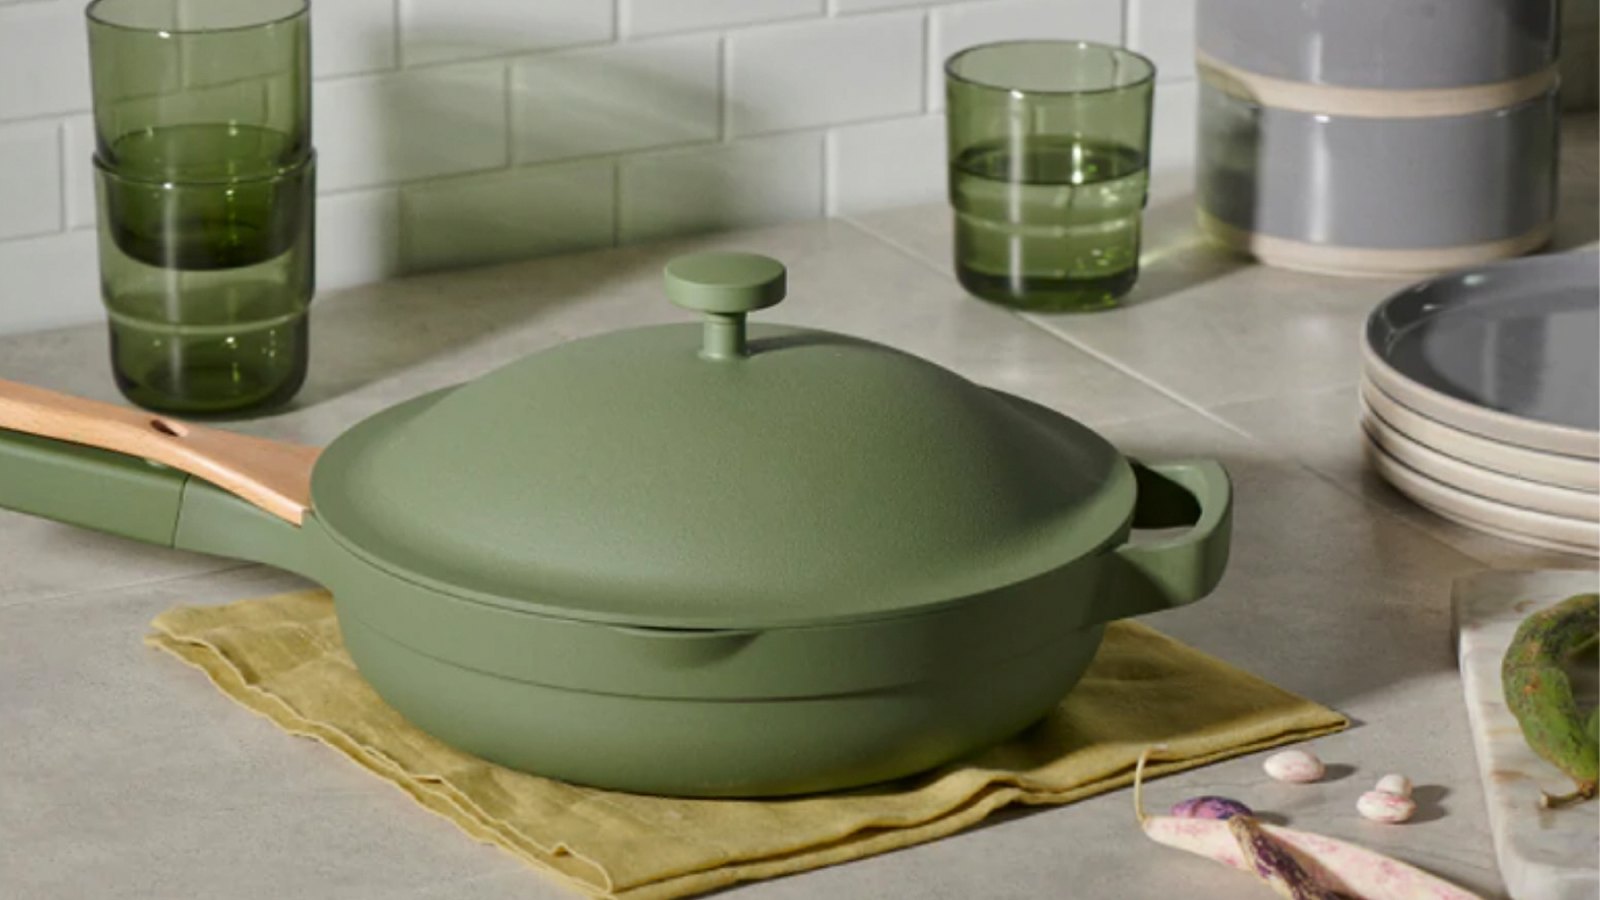 The Our Place Always Pan Is Currently On Sale for 20% Off